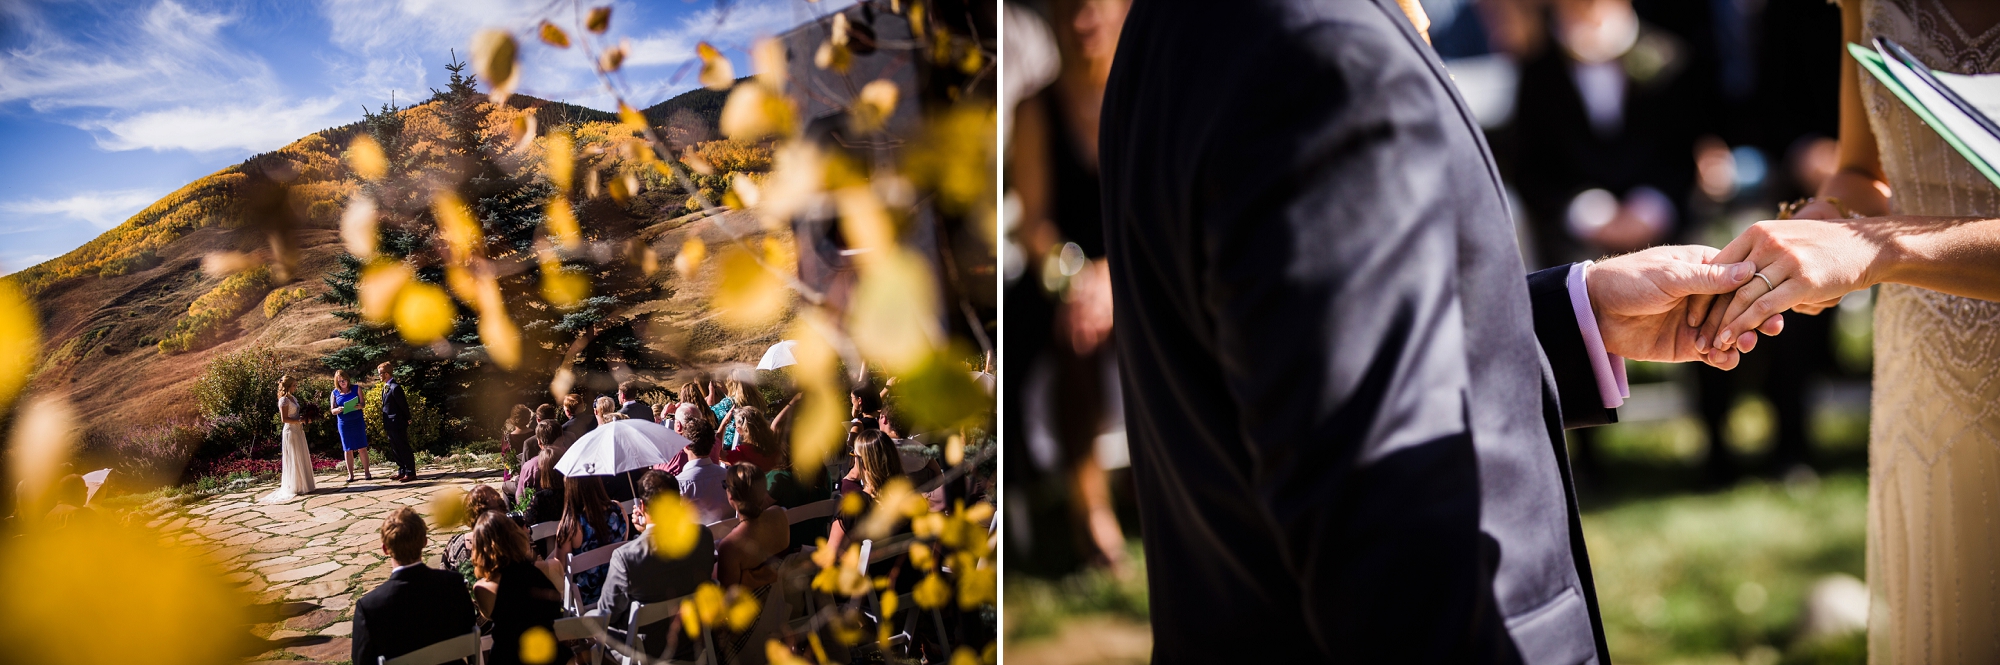 wedding_crested_butte_0619